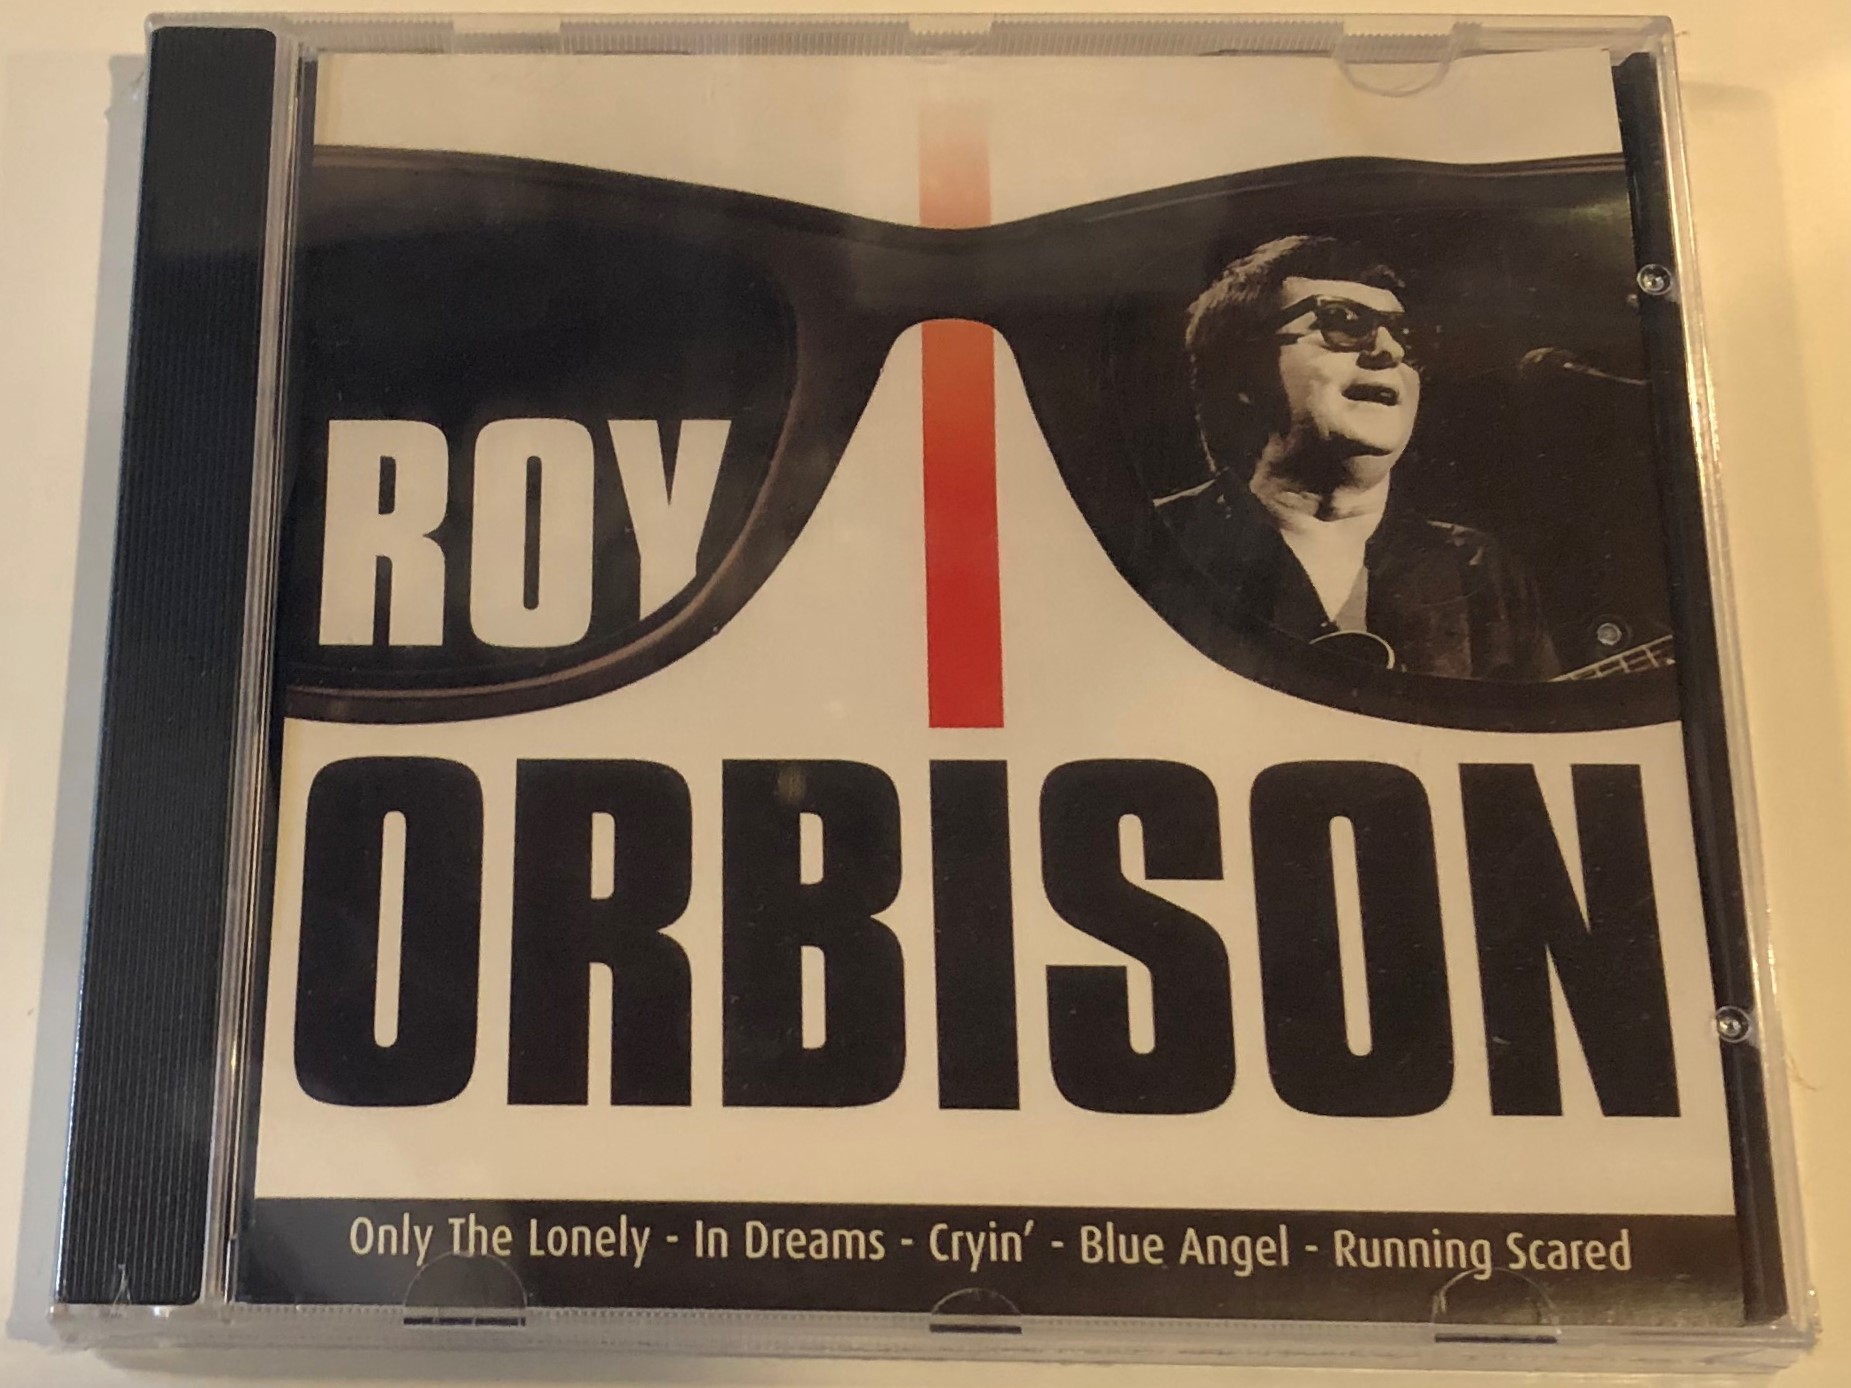 roy-orbison-only-the-lonely-in-dreams-cryin-blue-angel-running-scared-forever-gold-audio-cd-2006-fg417-1-.jpg